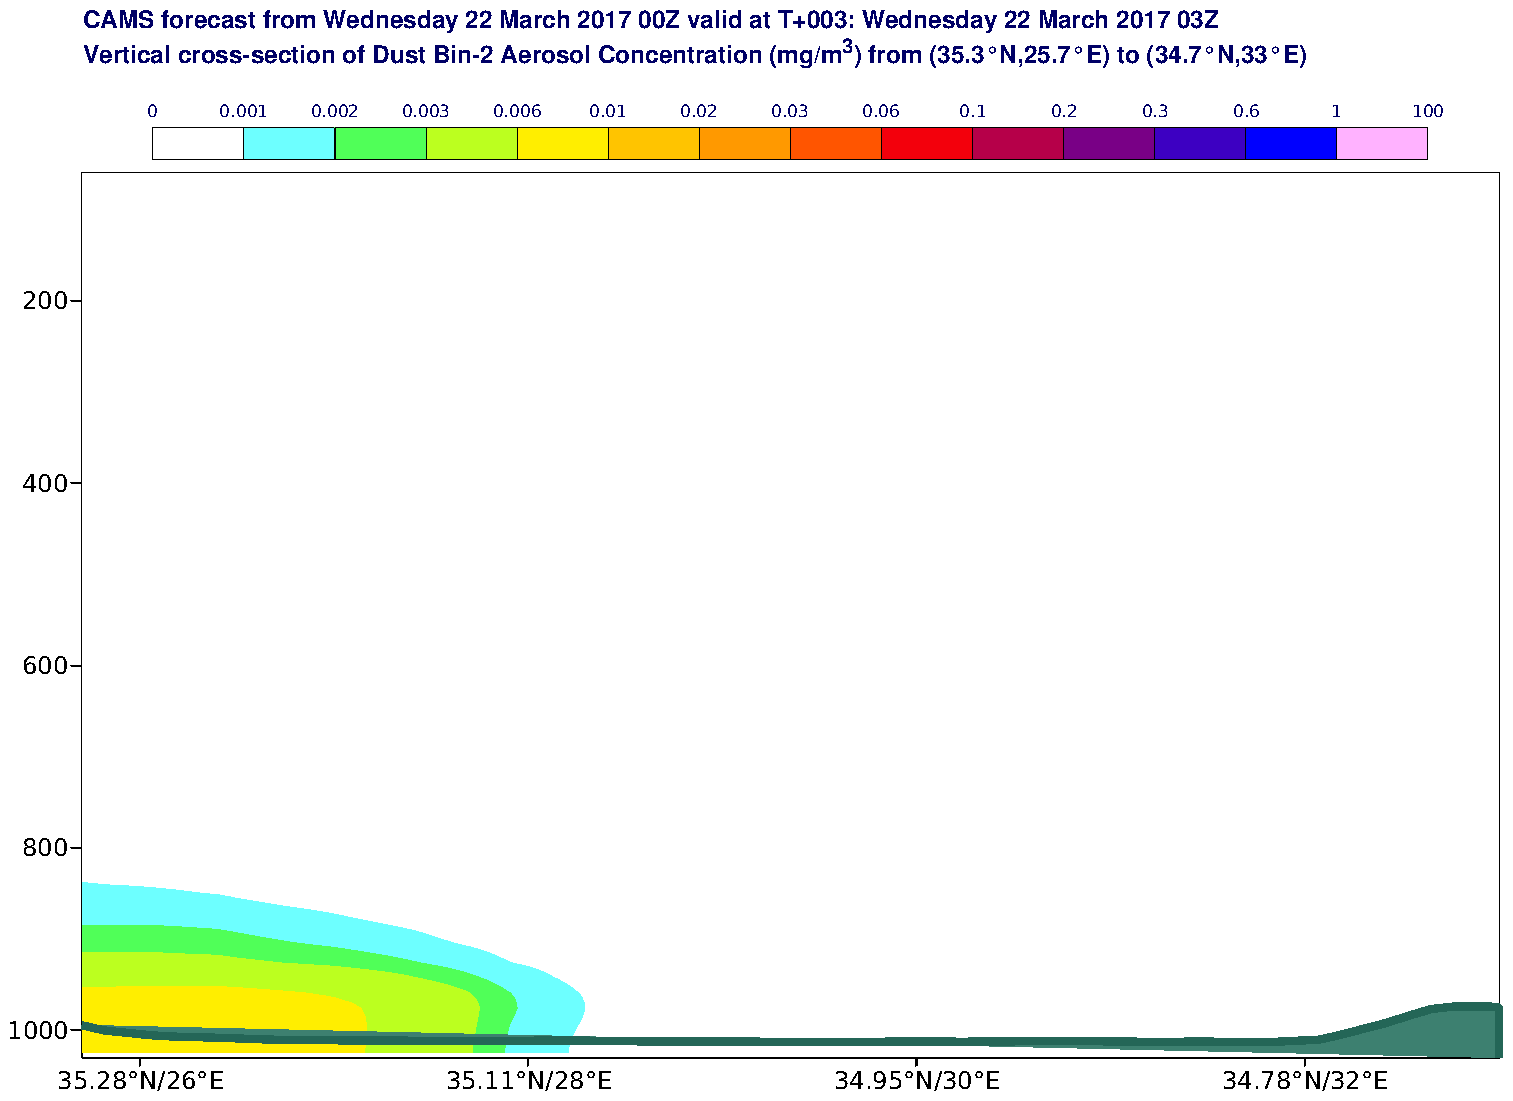 Vertical cross-section of Dust Bin-2 Aerosol Concentration (mg/m3) valid at T3 - 2017-03-22 03:00